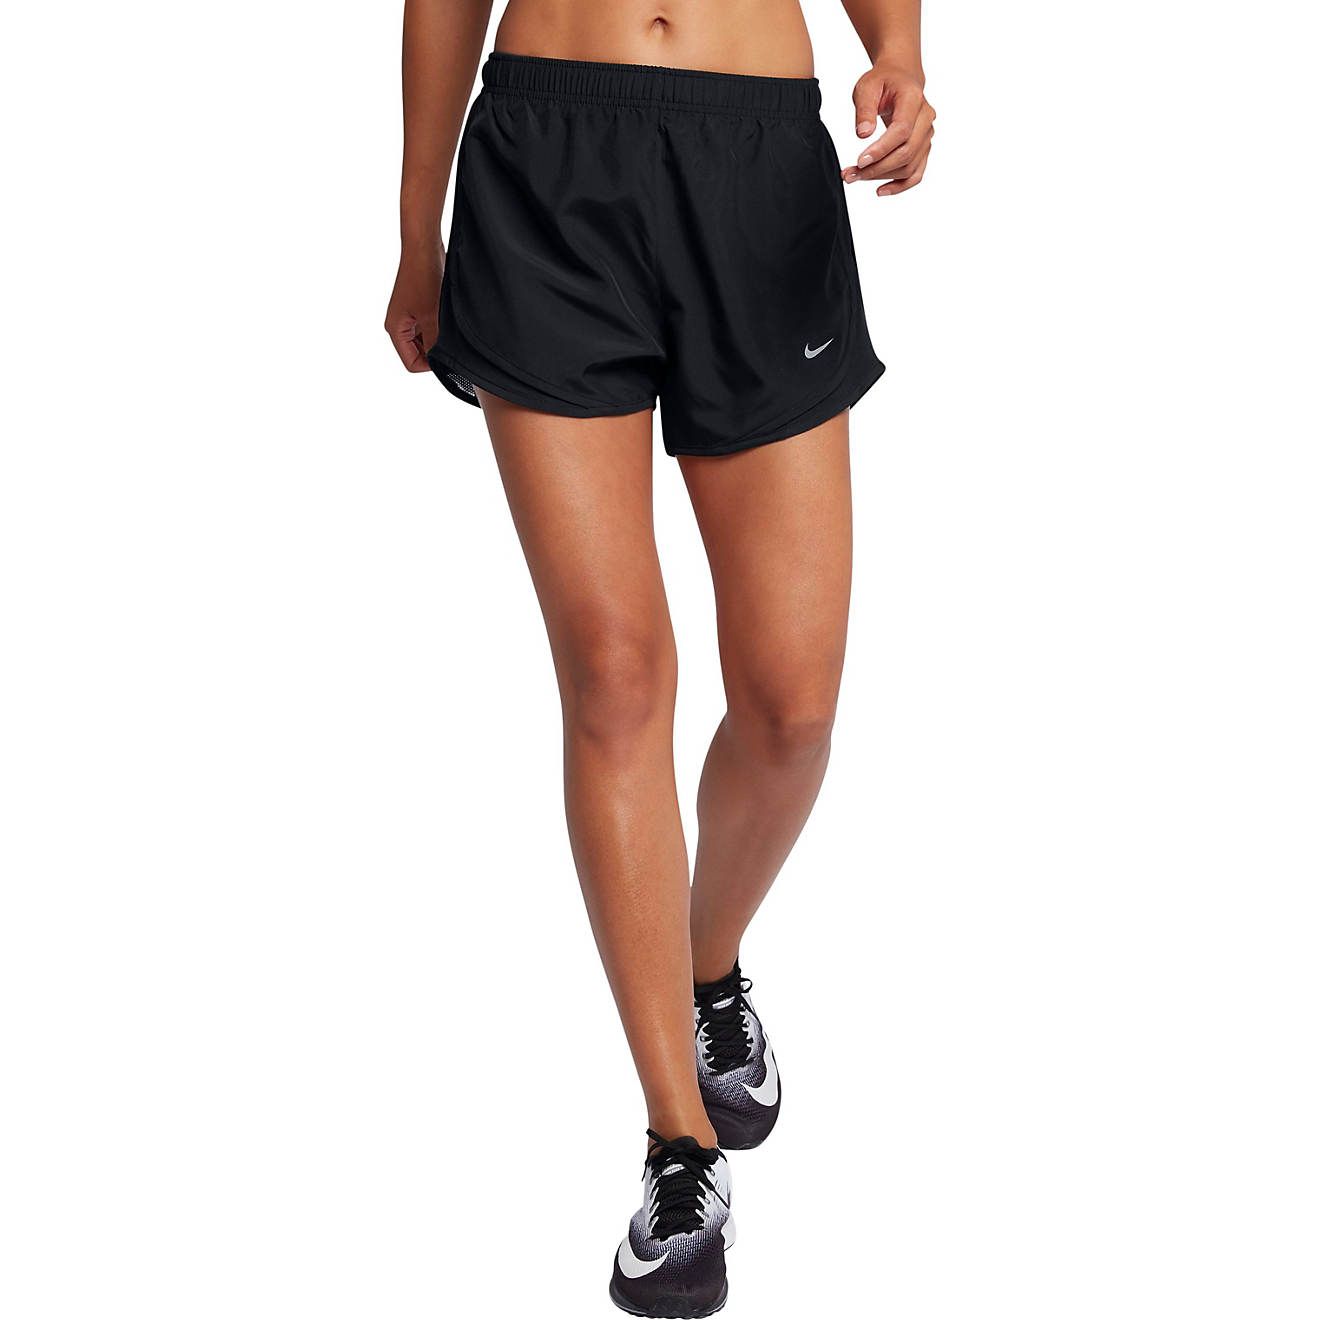 Nike Women's Dry Tempo Shorts | Academy Sports + Outdoor Affiliate